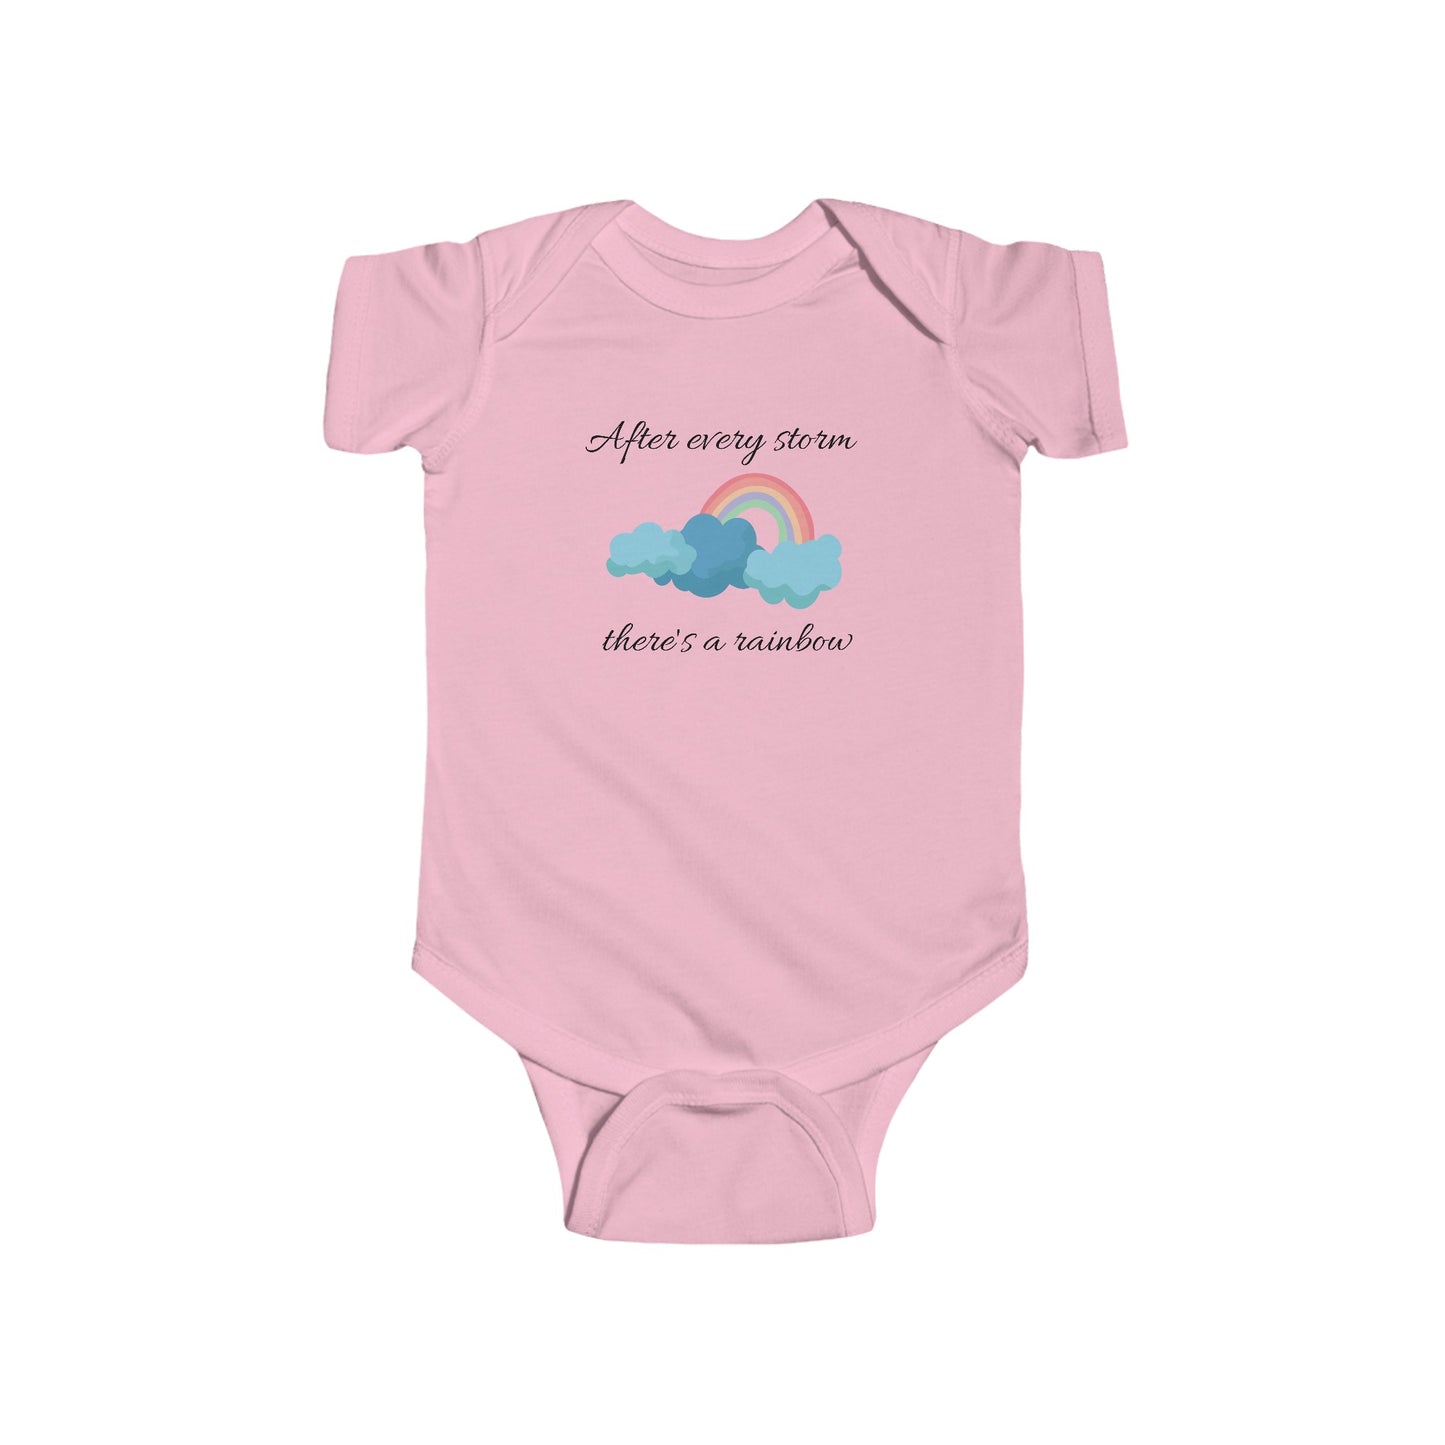 After every storm, there's a rainbow Baby Bodysuit